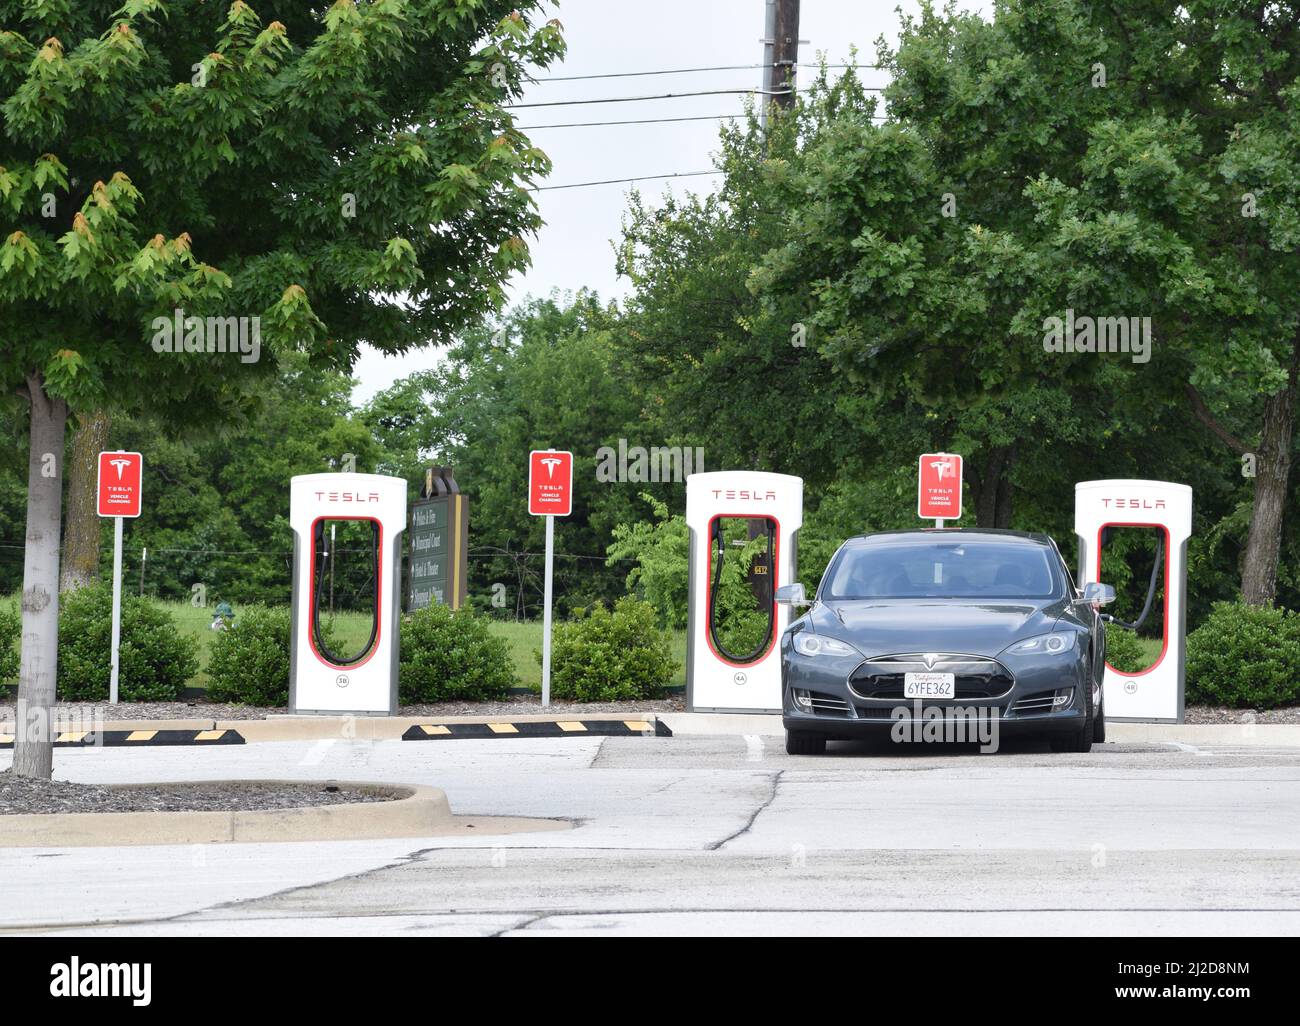 A Tesla electric car parked at a Tesla charging station in Southlake, TX Stock Photo